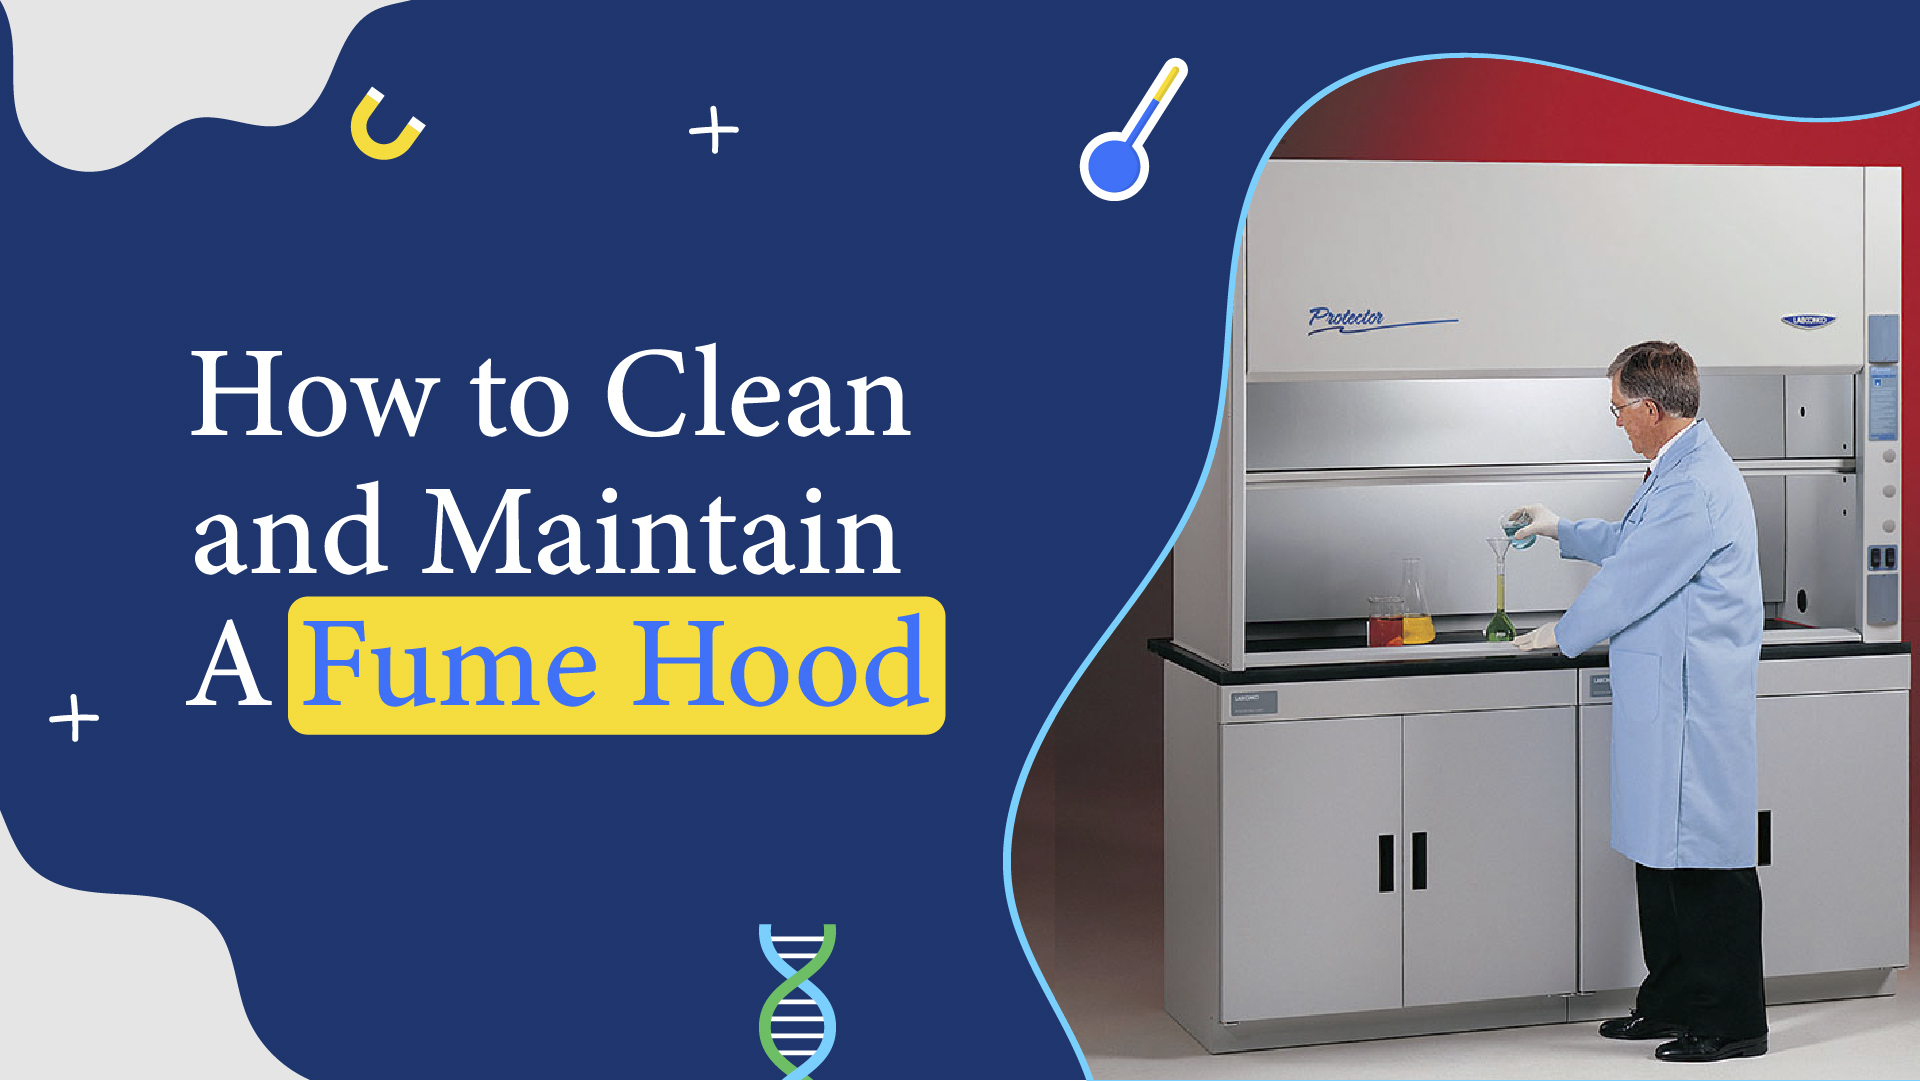 How to Clean and Maintain a Fume Hood